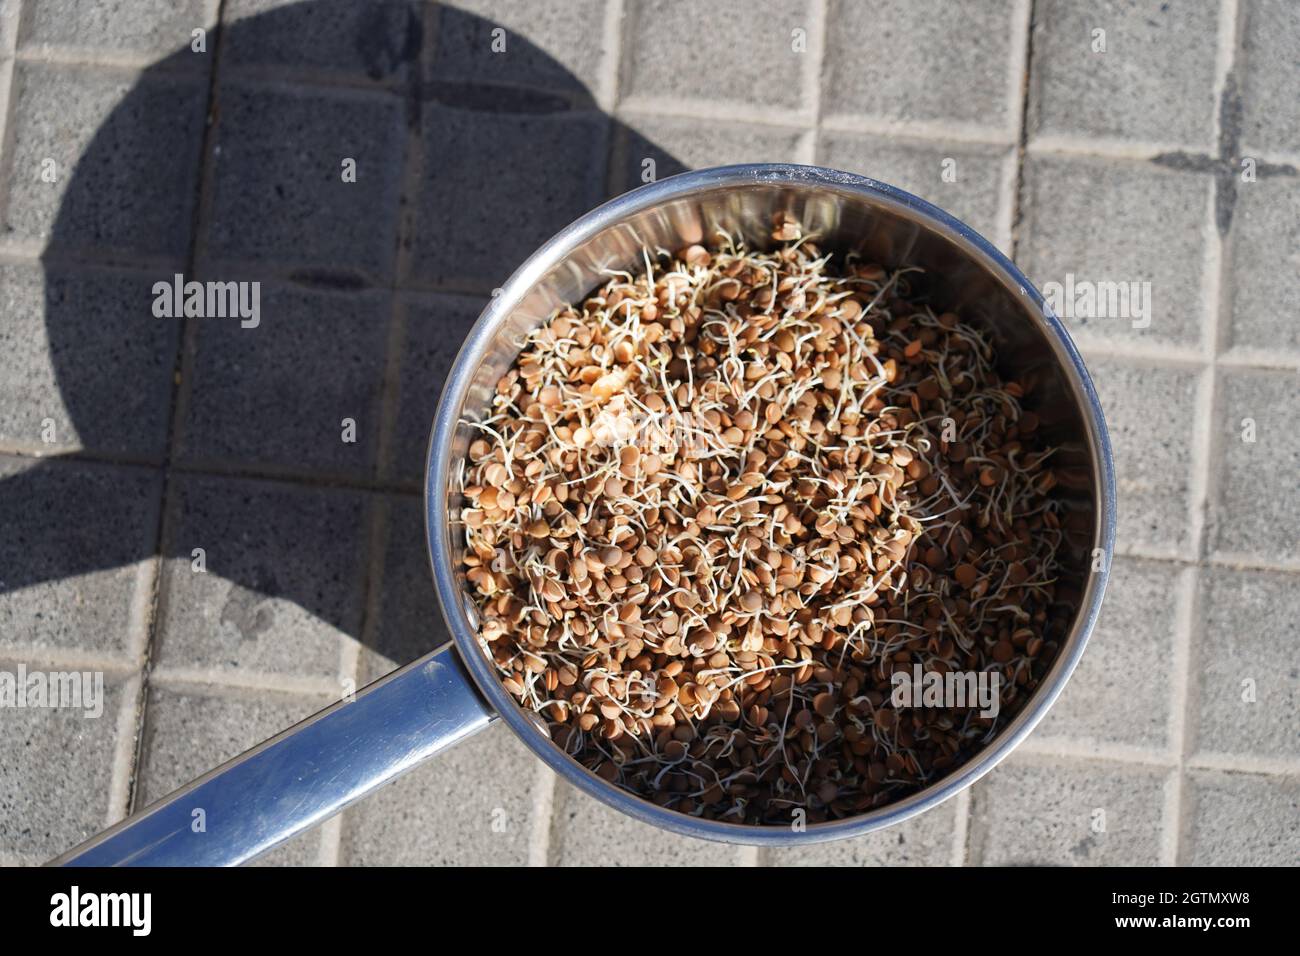 Pot With Germinated, Sprouted Lentils, Legumes, On Street Stock Photo